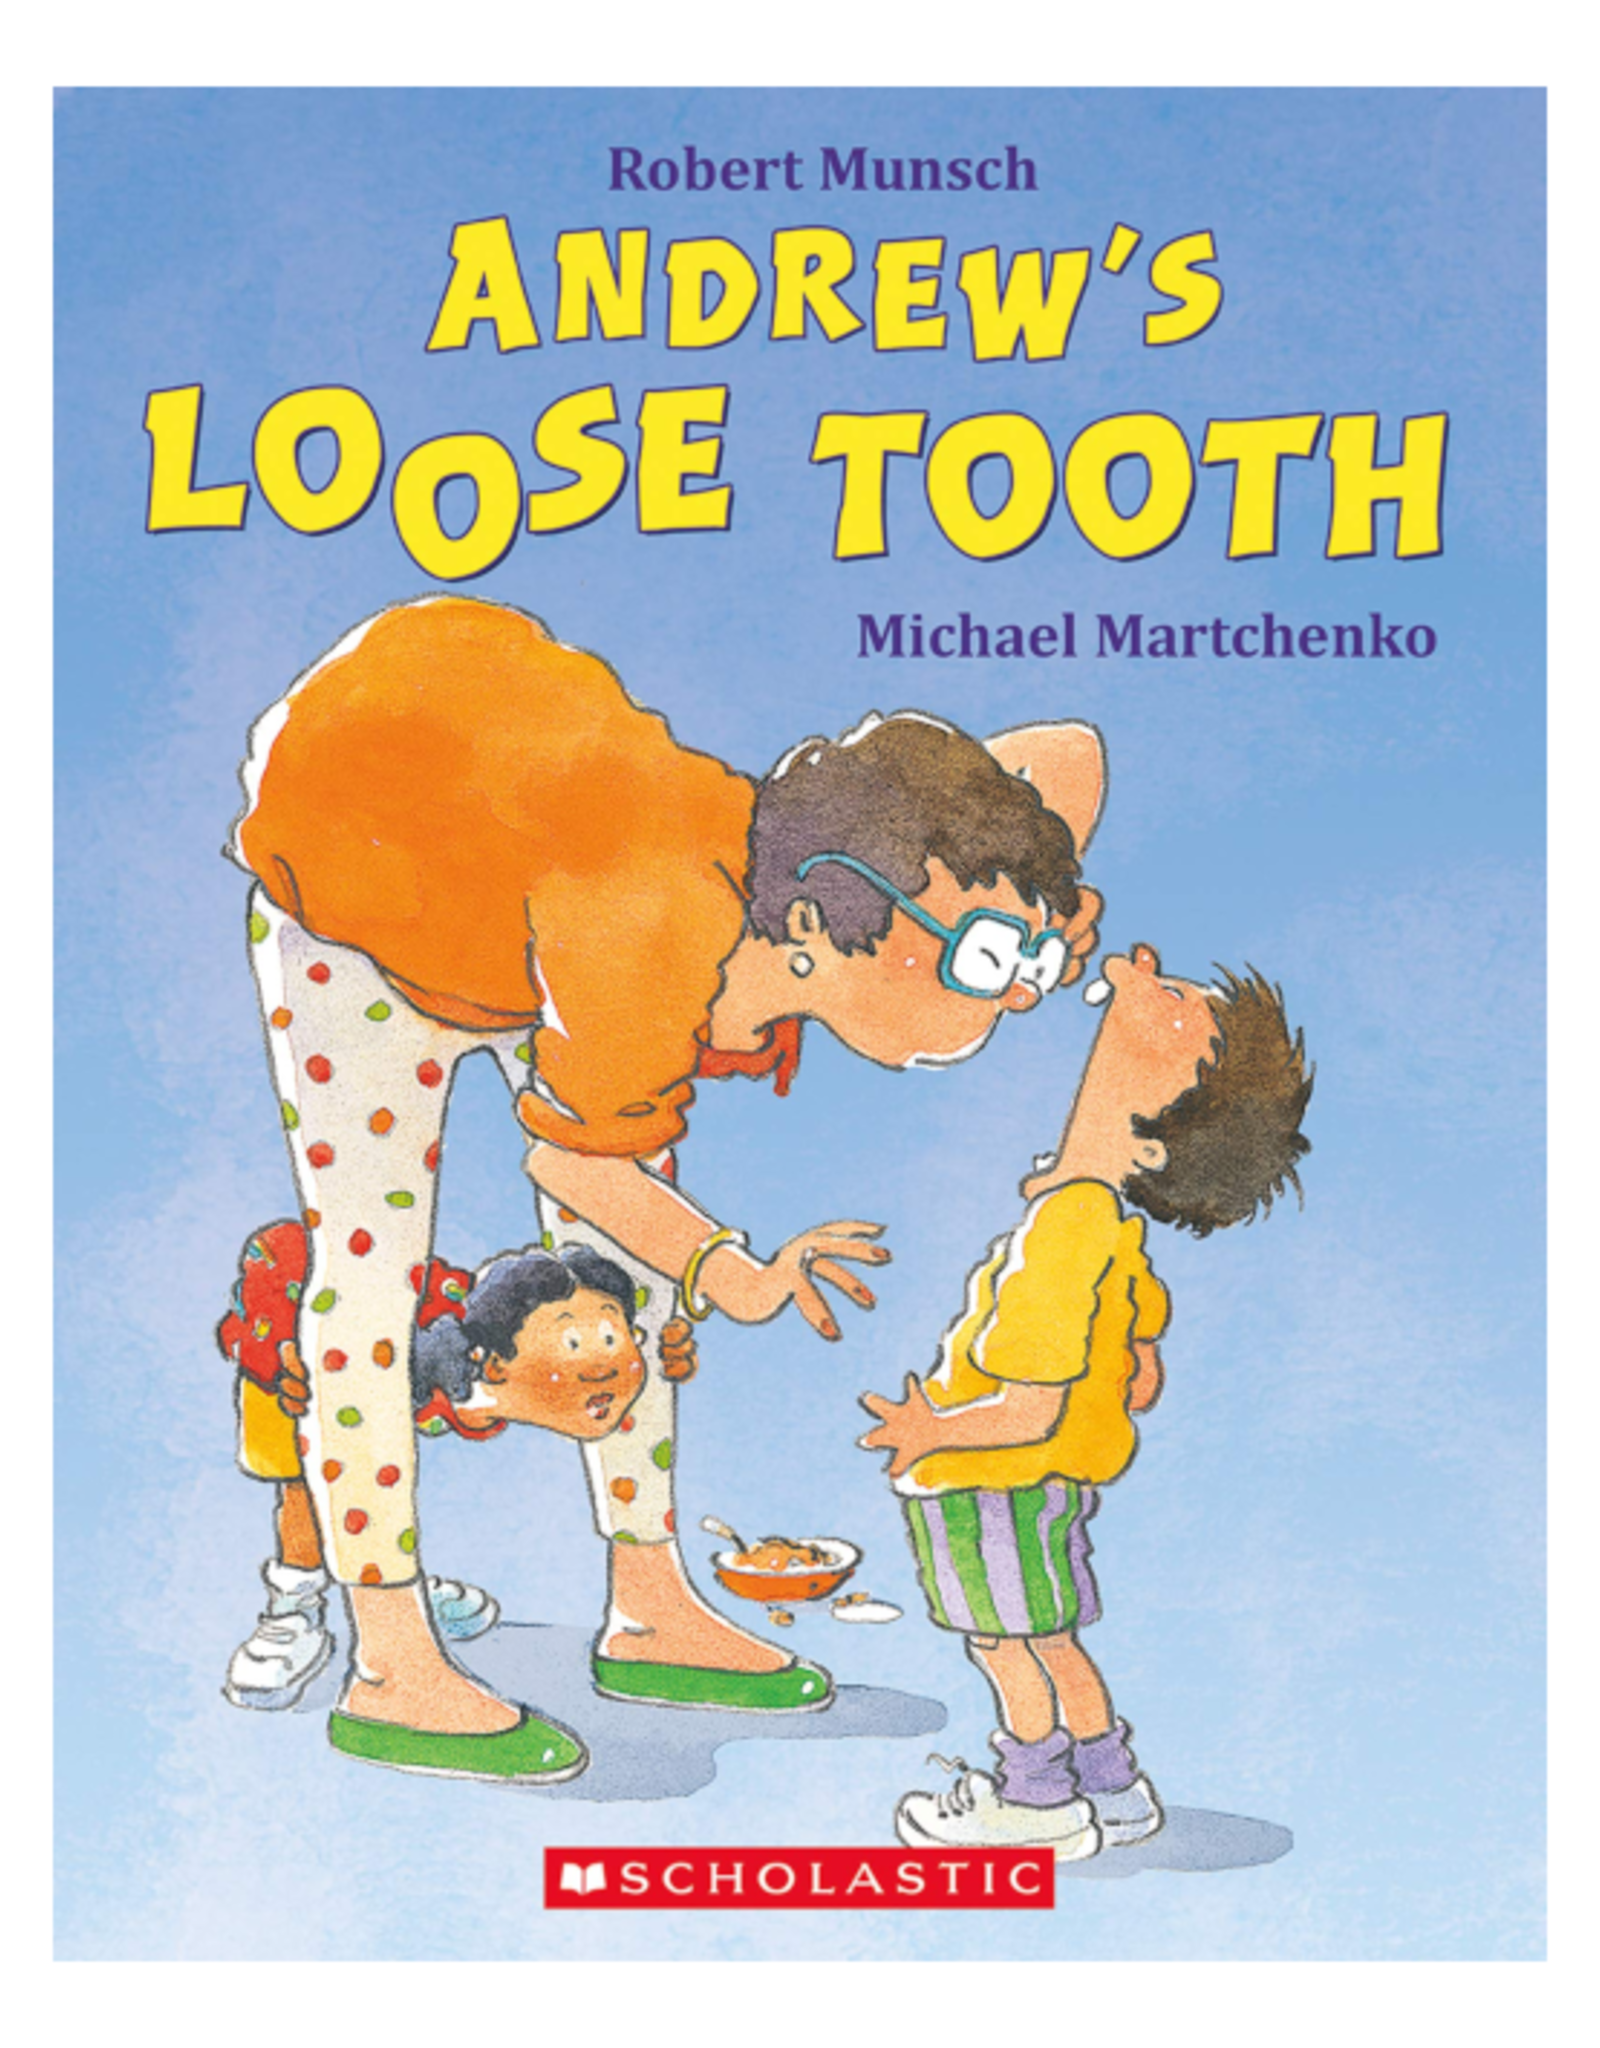 Scholastic Books Book - Andrew's Loose Tooth